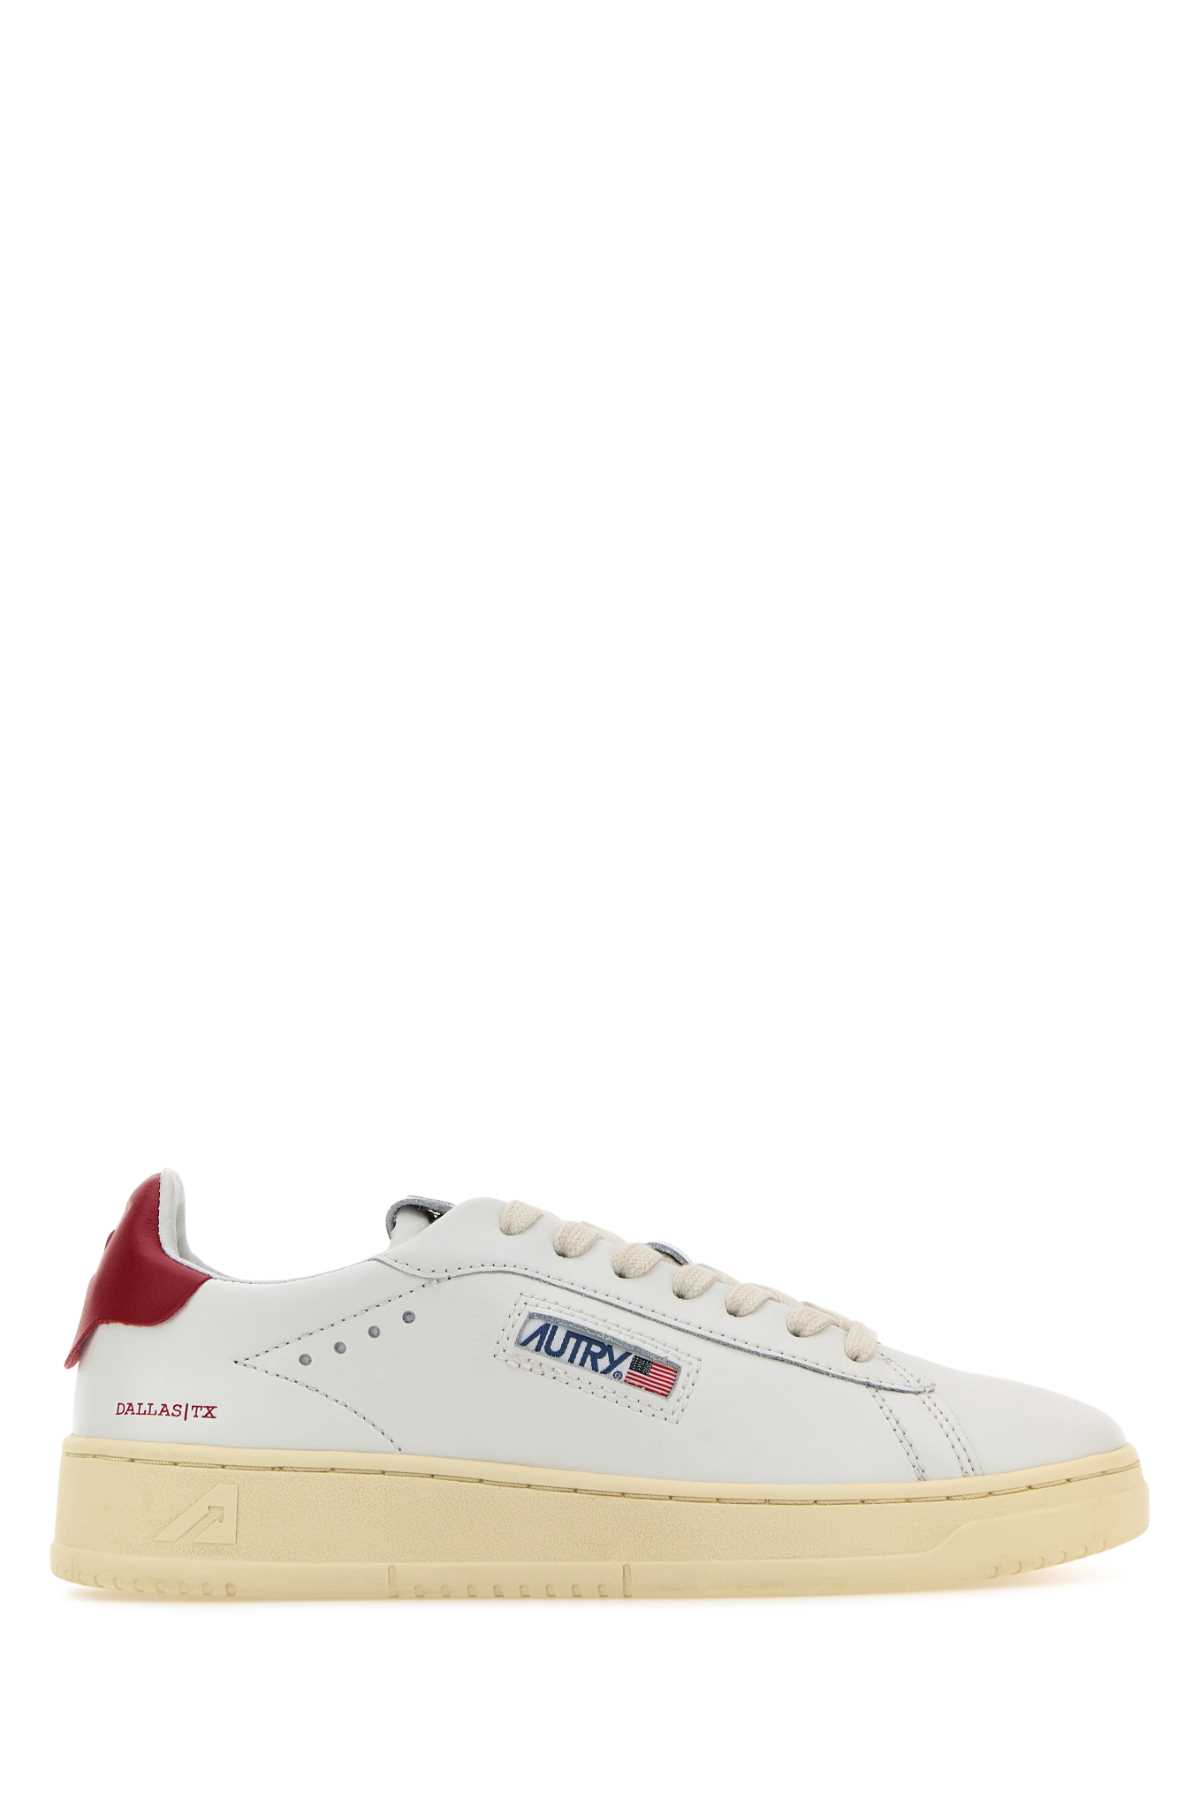 Shop Autry White Leather Dallas Sneakers In Nw03